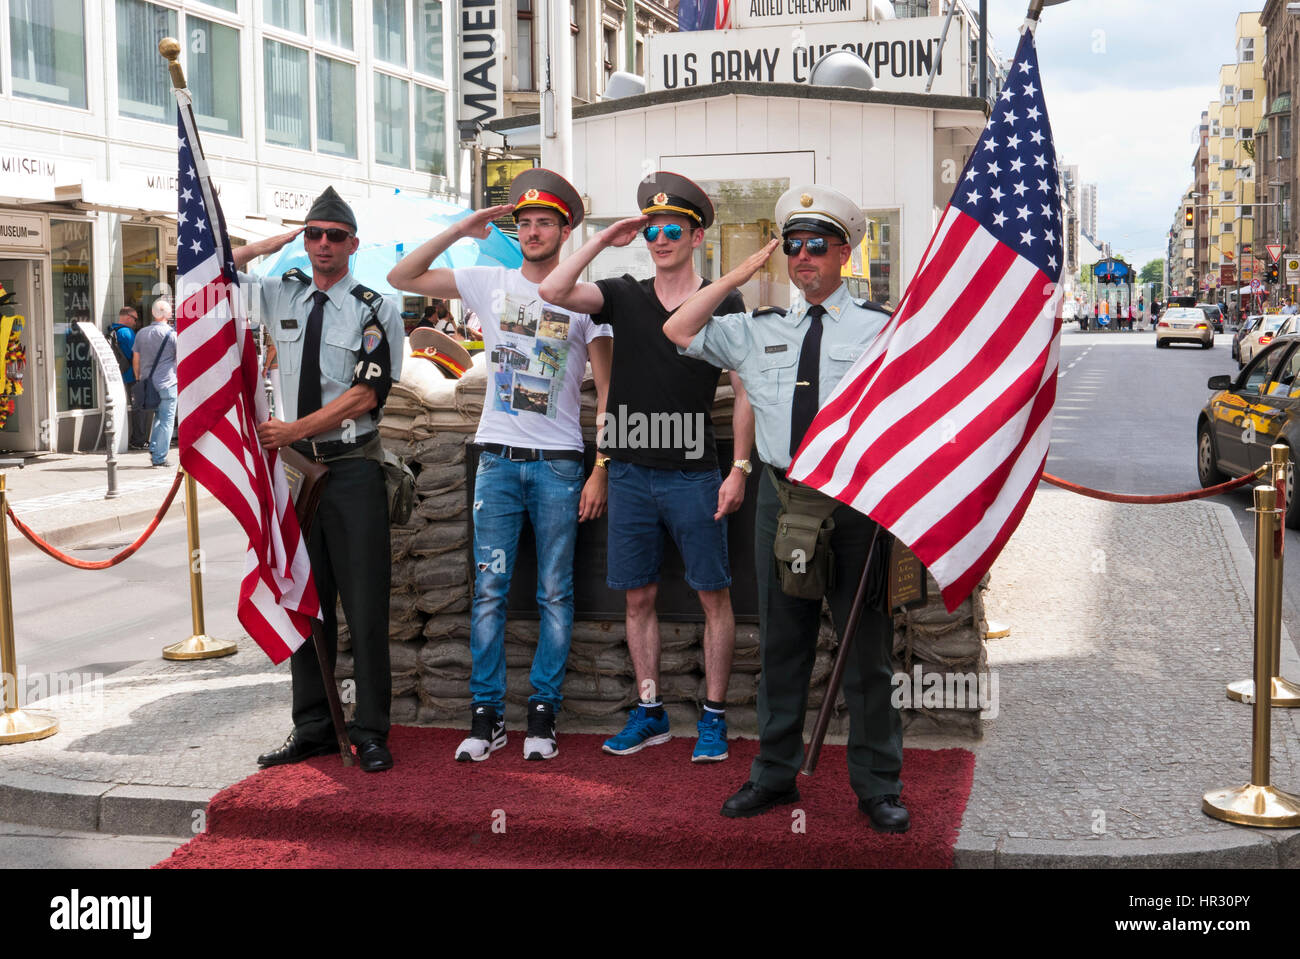 Two uniformed men holding American flags and two male tourists having photographs taken at Check Point Charlie, Berlin, Germany Stock Photo